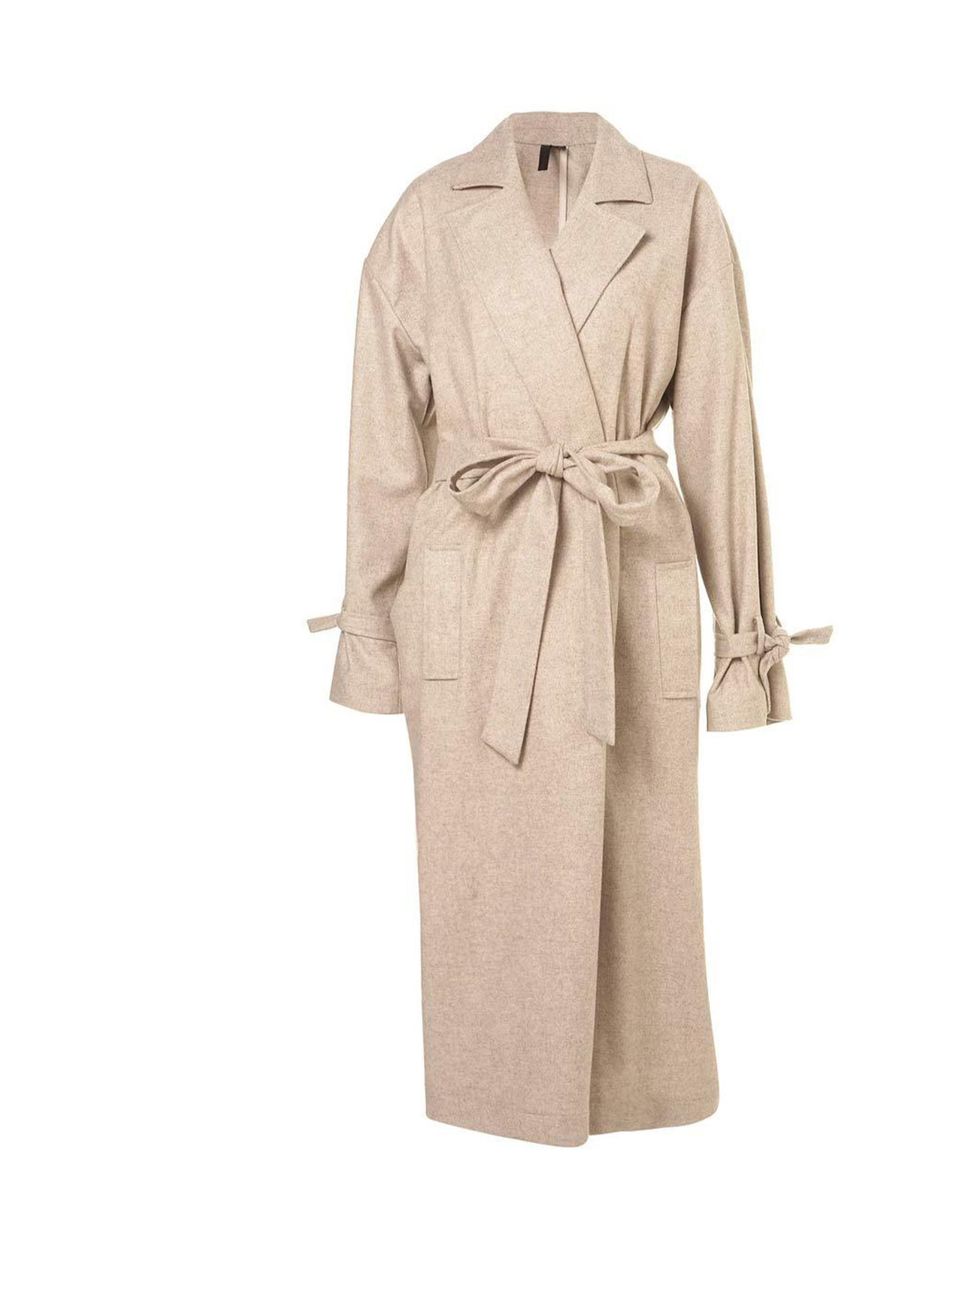 <p>Topshop Wool Mac By Boutique, £150</p><p><a href="http://www.topshop.com/webapp/wcs/stores/servlet/ProductDisplay?beginIndex=41&amp;viewAllFlag=&amp;catalogId=33057&amp;storeId=12556&amp;productId=7828516&amp;langId=-1&amp;sort_field=Relevance&amp;cate